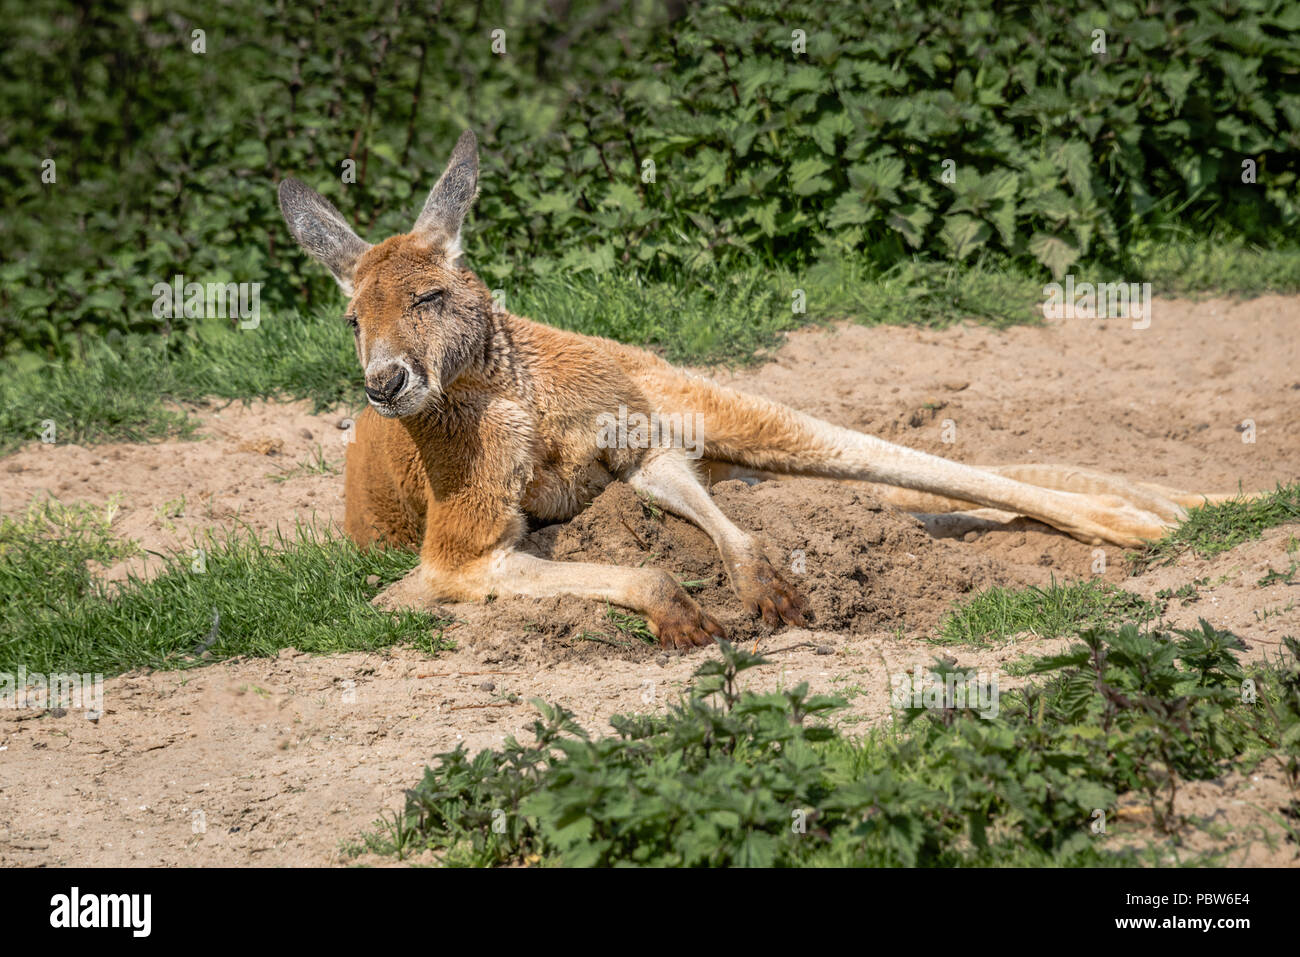 A full length photograph of a red kangaroo lying in the sunshine. It has its eyes shut and is spread out in a relaxing pose on sand with foliage in th Stock Photo